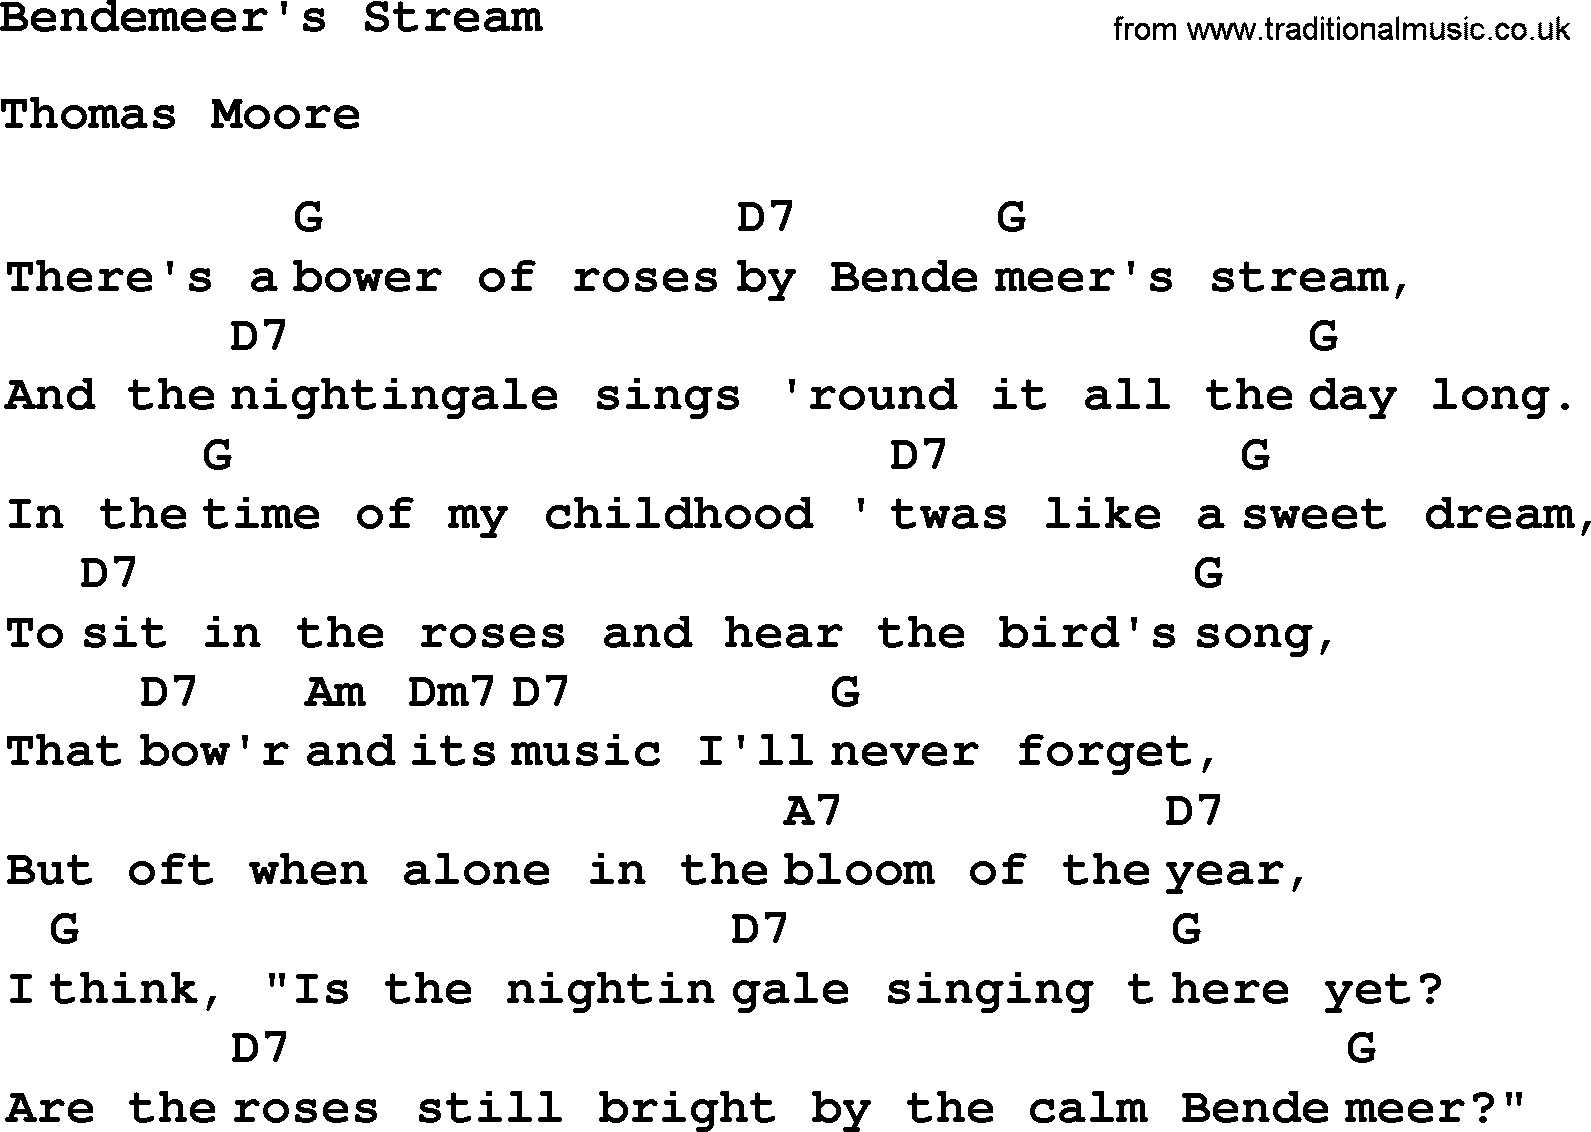 Top 1000 Most Popular Folk and Old-time Songs: Bendemeers Stream, lyrics and chords